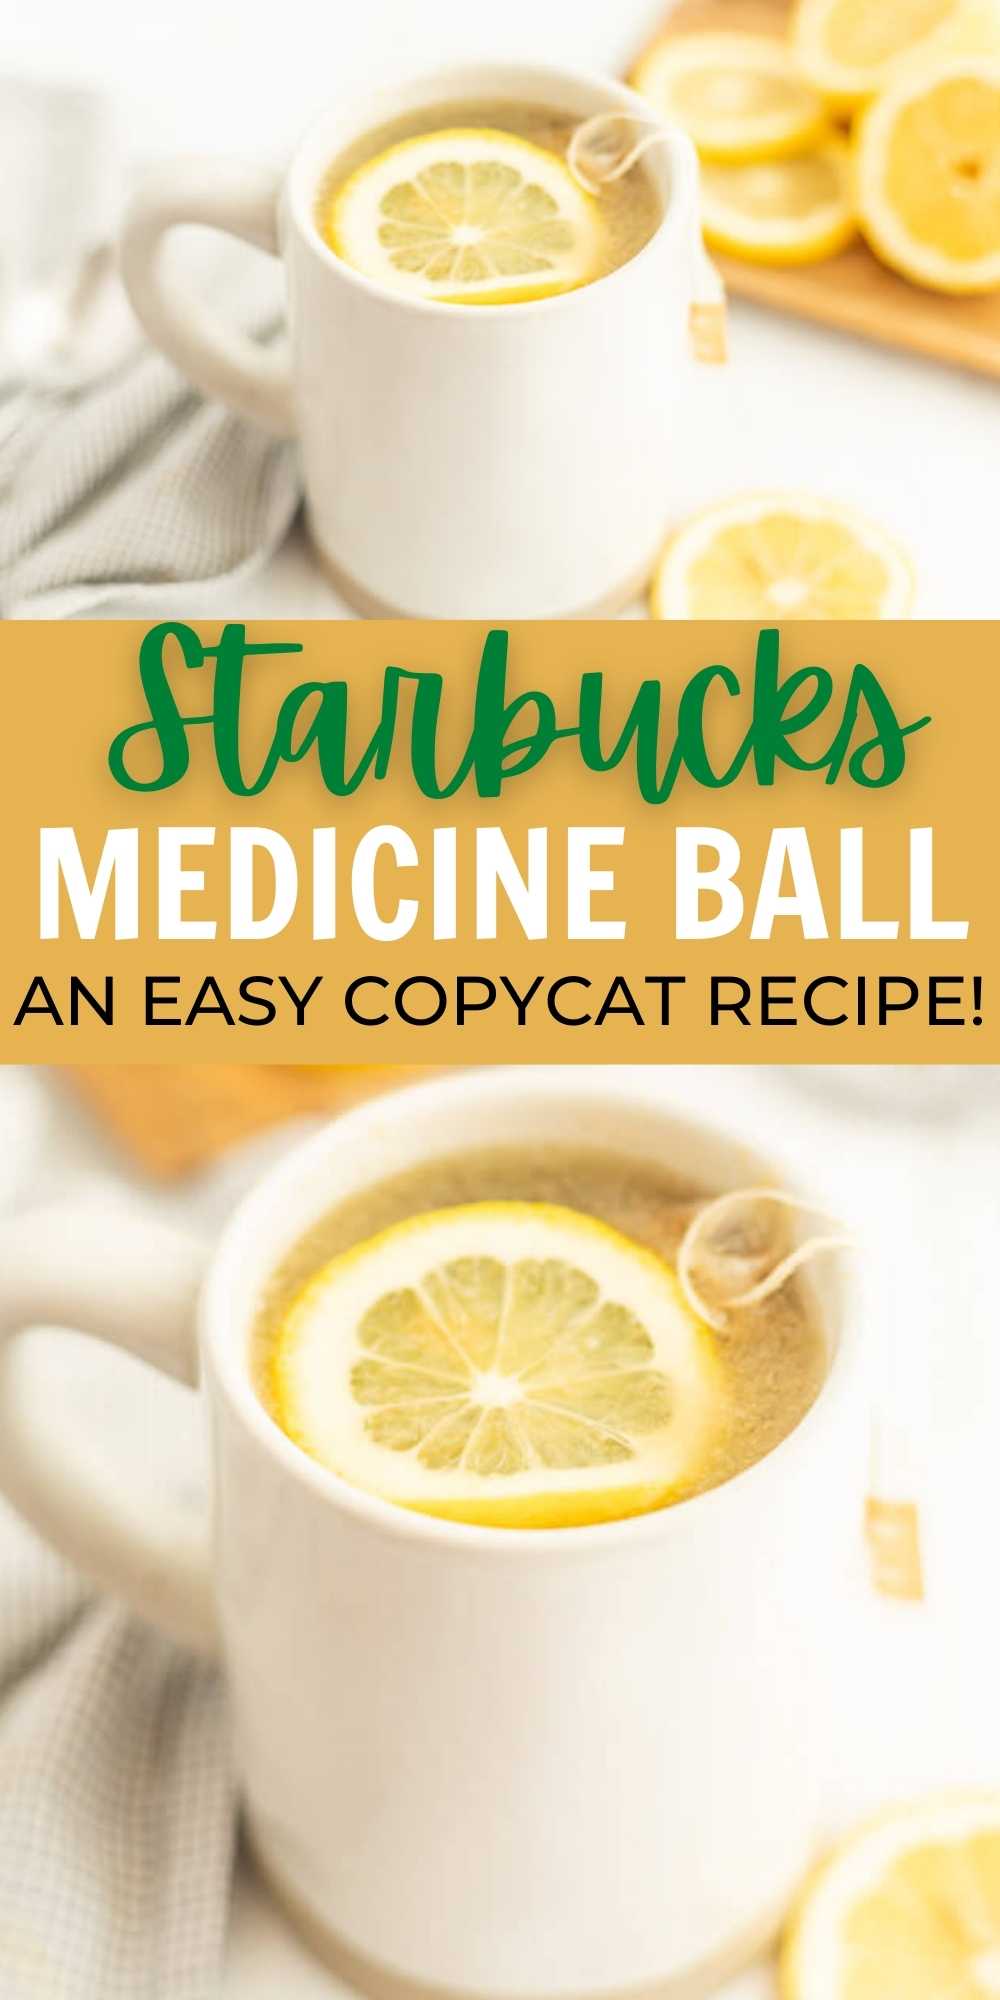 Order a Medicine Ball at Starbucks to Cure What Ails You